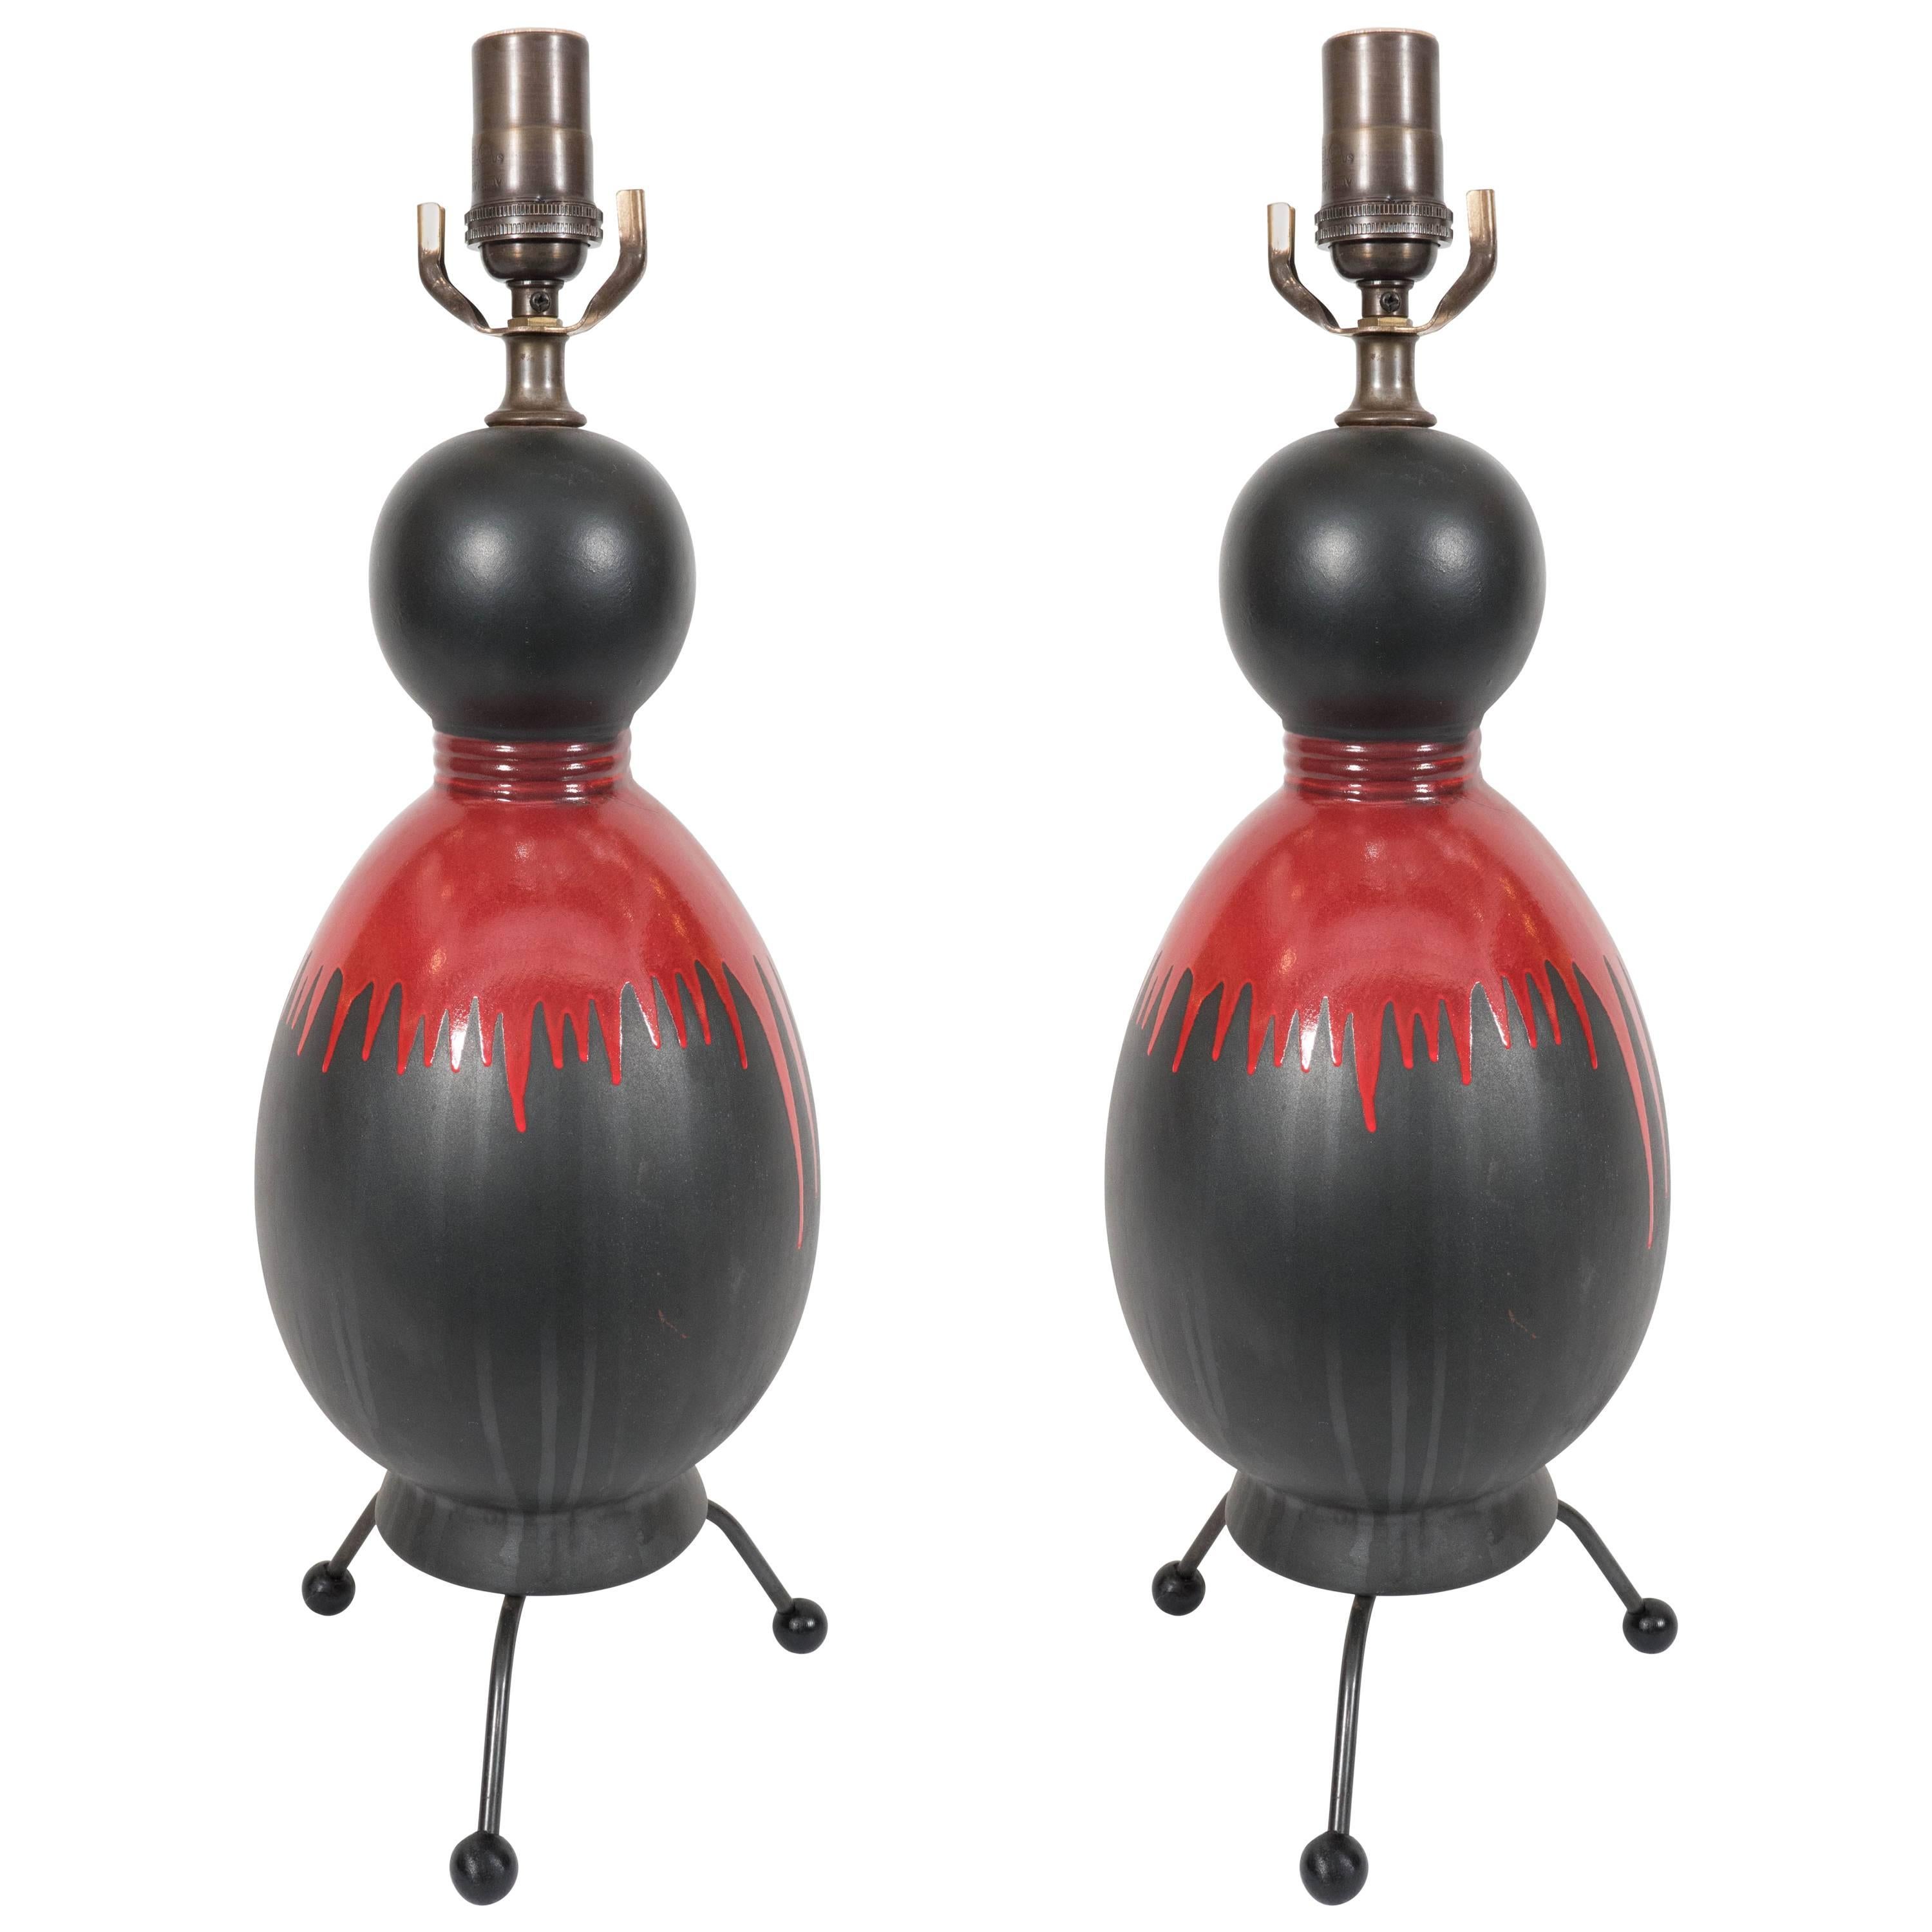 Pair of Midcentury Black Glazed Gourd Lamps with Red Drip Glaze